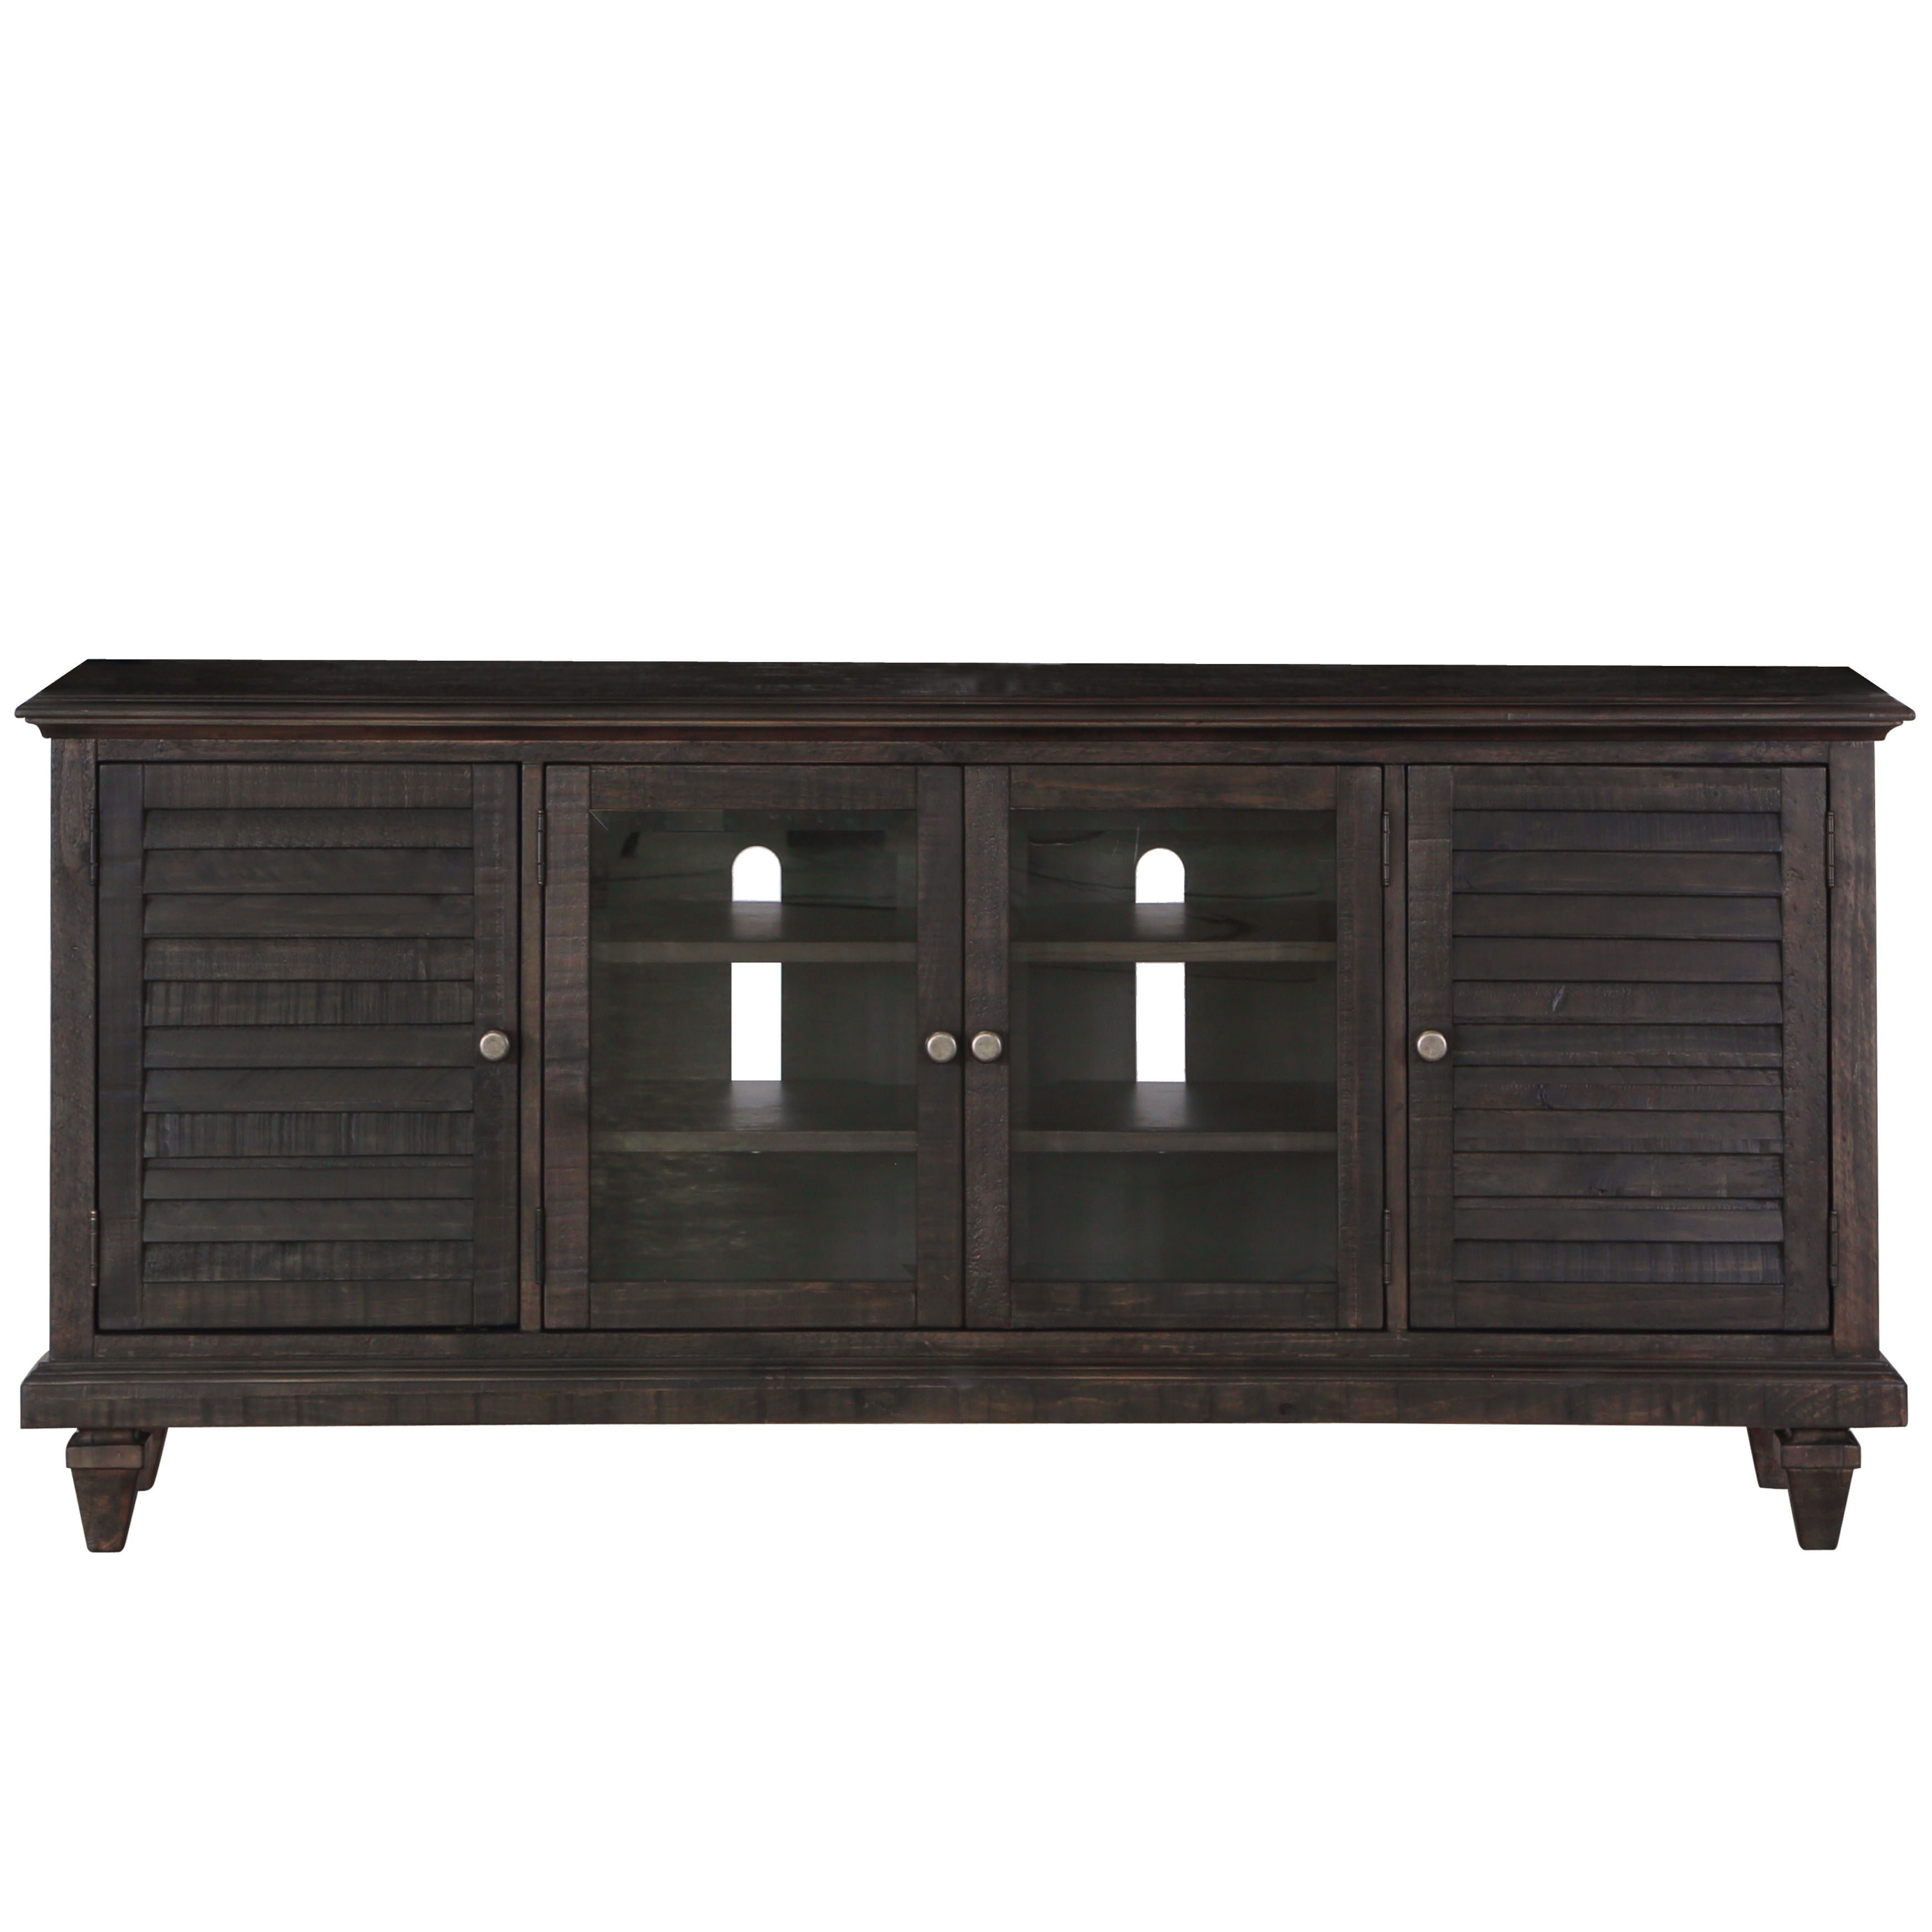 Calistoga - Entertainment Console - Weathered Charcoal